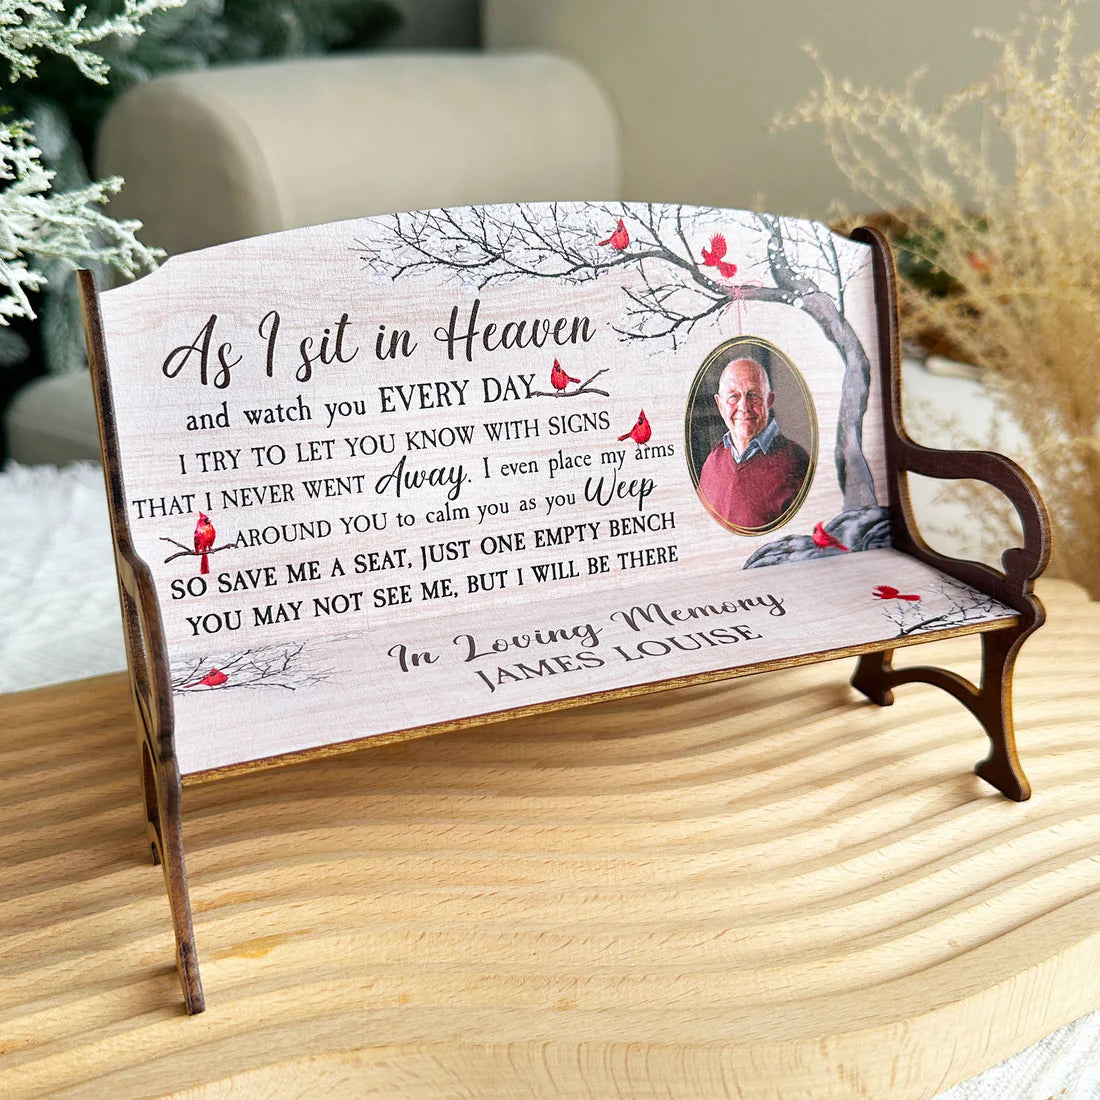 Save Me A Seat - Personalized Photo Memorial Bench